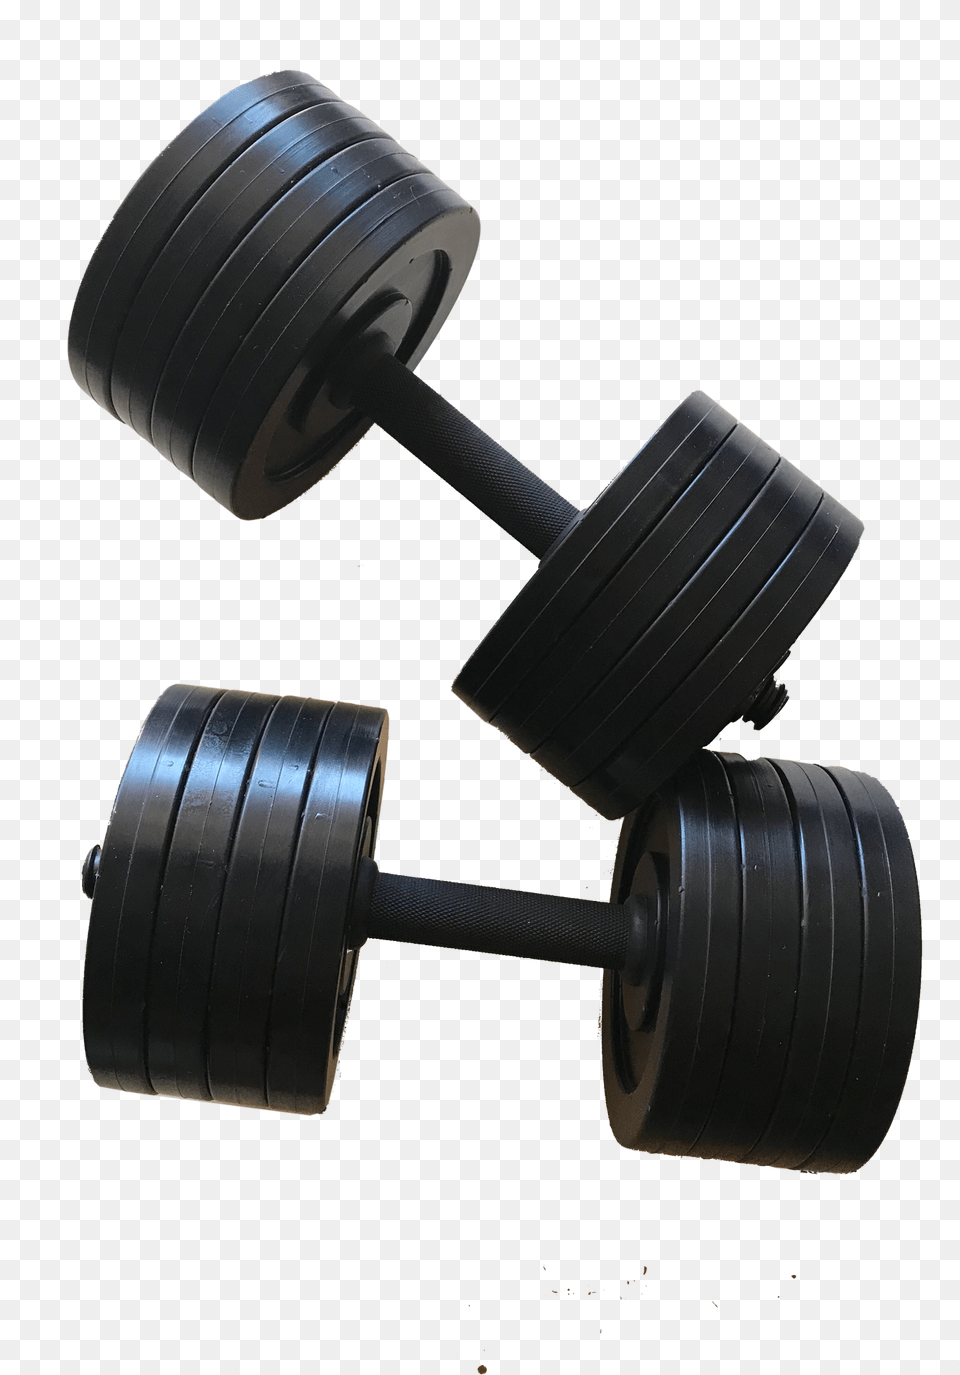 Fake Weights Buy Fake Weights Plastic Weights Prop Dumbbell, Fitness, Gym, Gym Weights, Sport Free Transparent Png